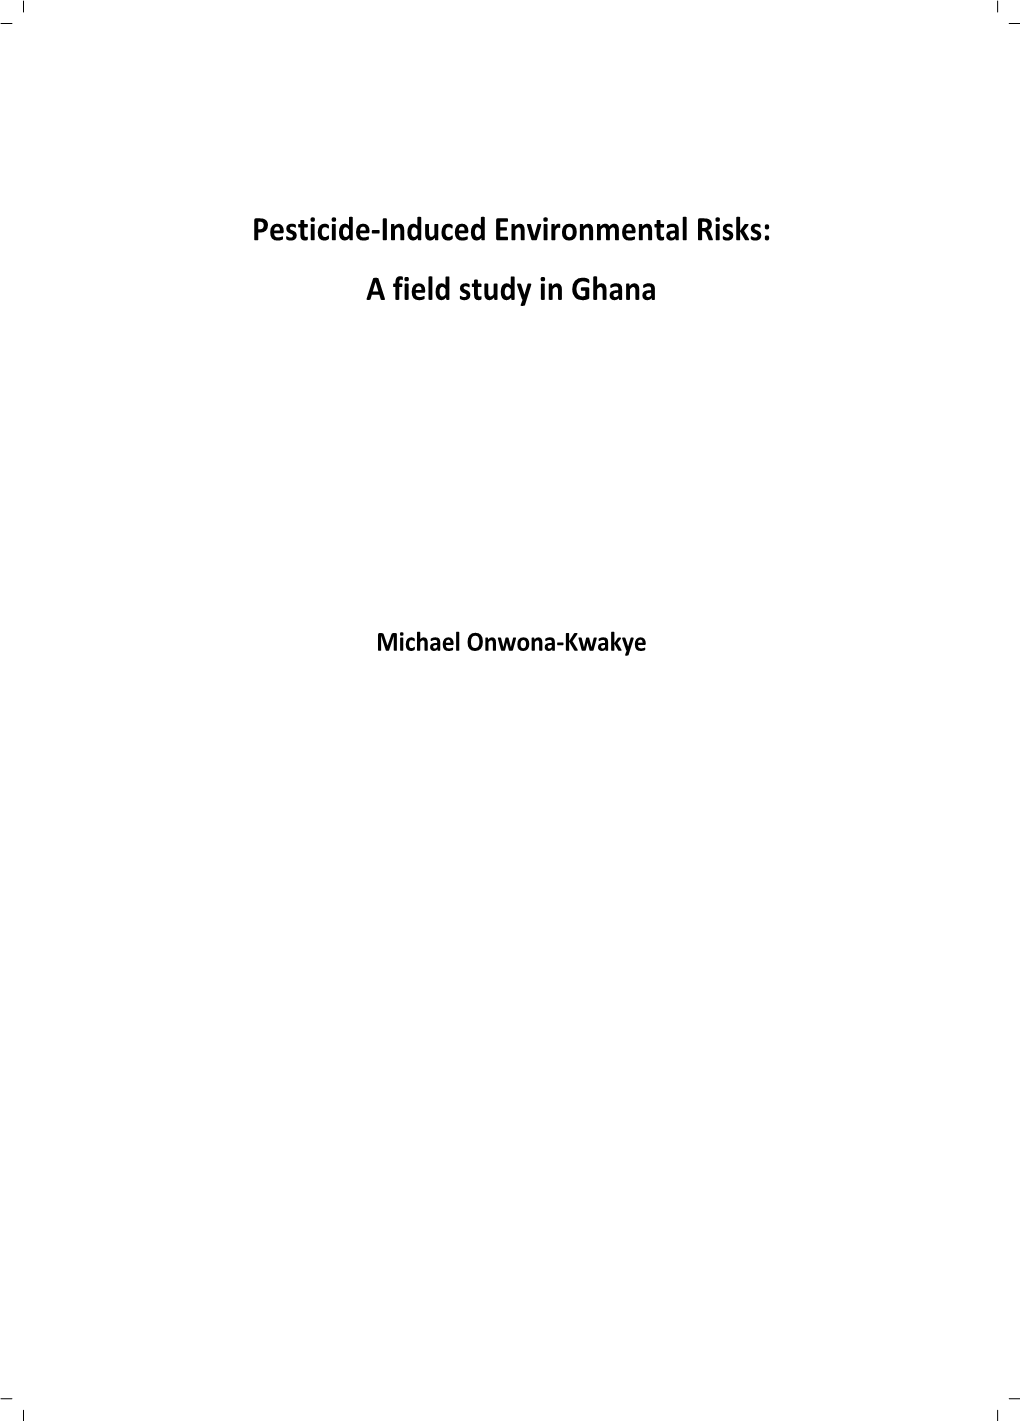 Pesticide-Induced Environmental Risks: a Field Study in Ghana